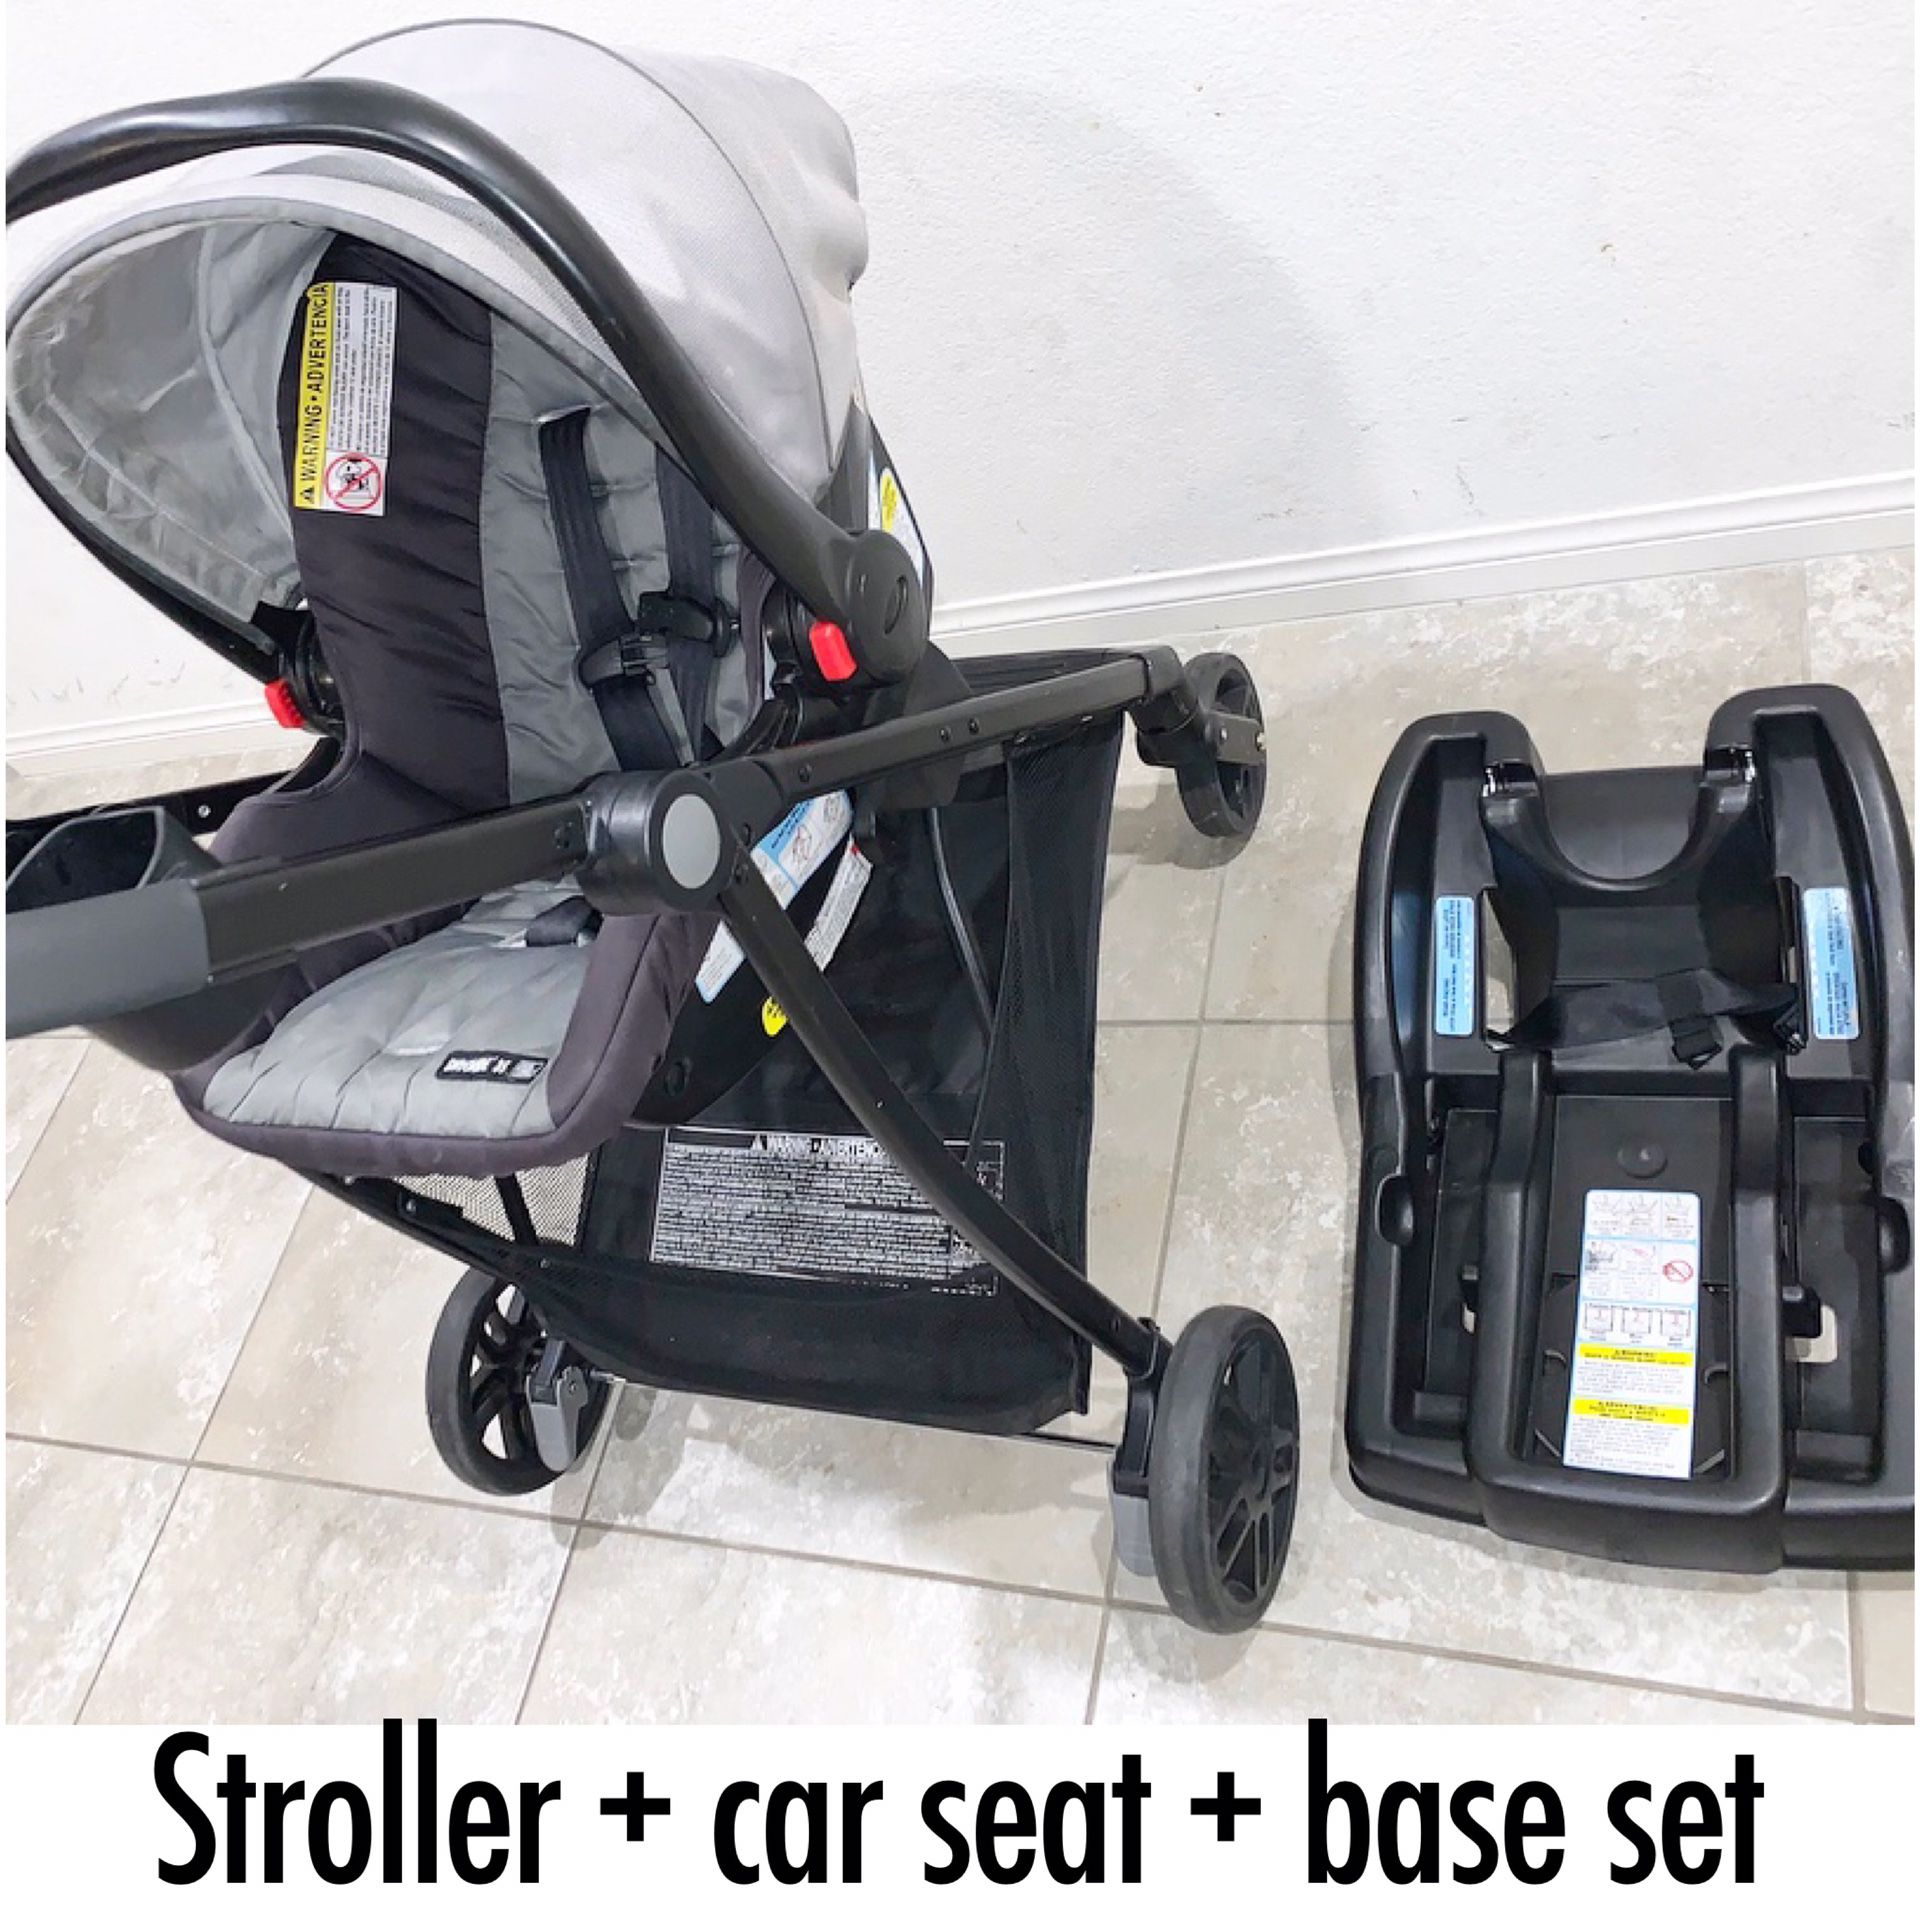 Click connect Snug Ride stroller + car seat + base “travel system”. A must-have! Feel free to msg me anytime